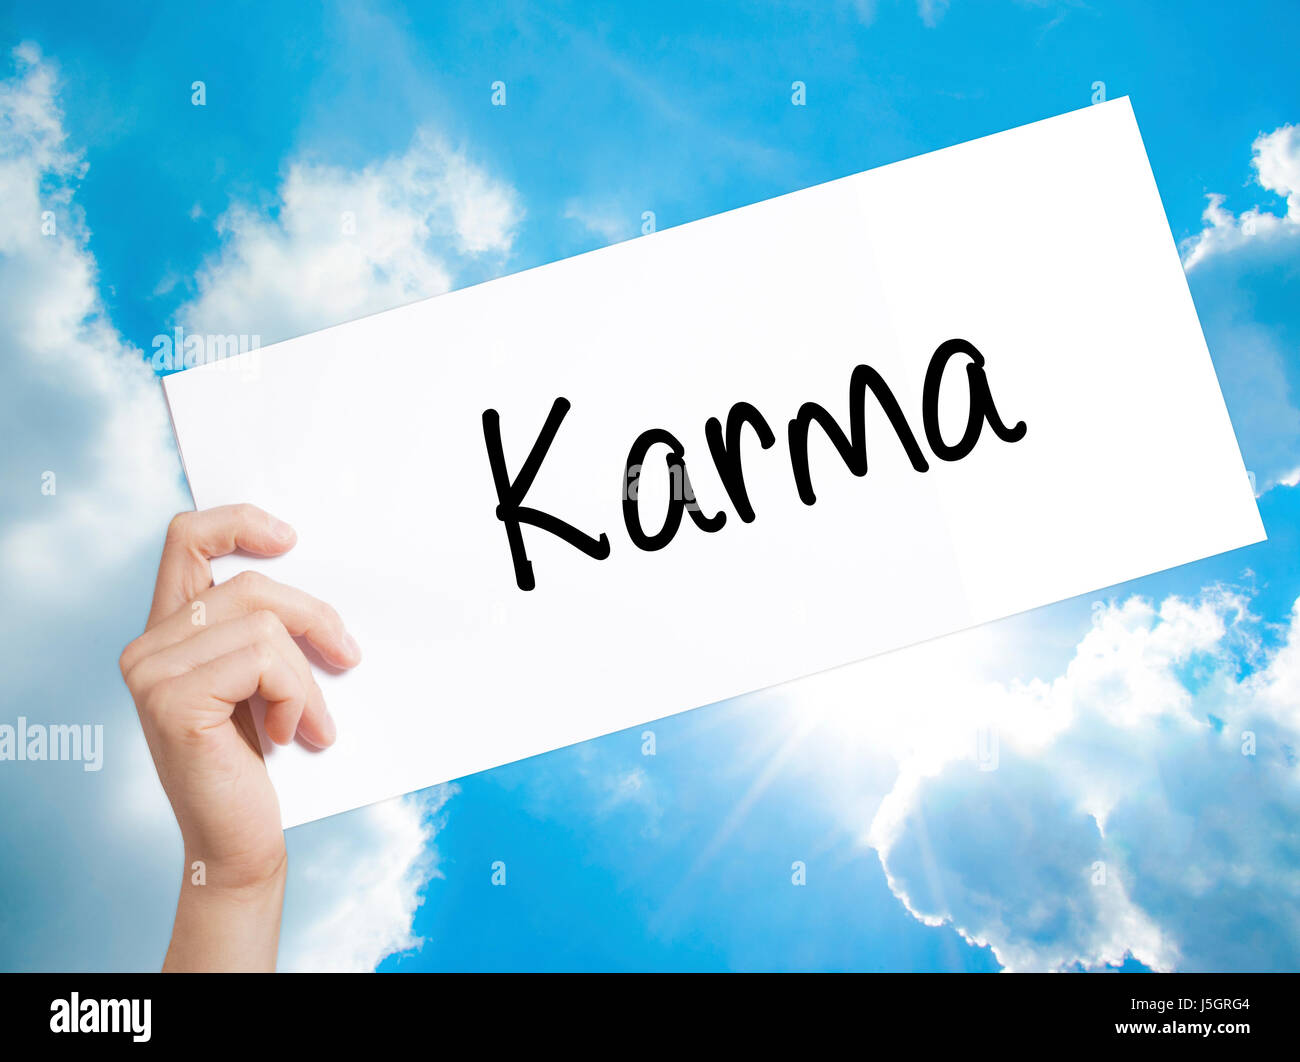 Karma  Sign on white paper. Man Hand Holding Paper with text. Isolated on sky background.  Business concept. Stock Photo Stock Photo